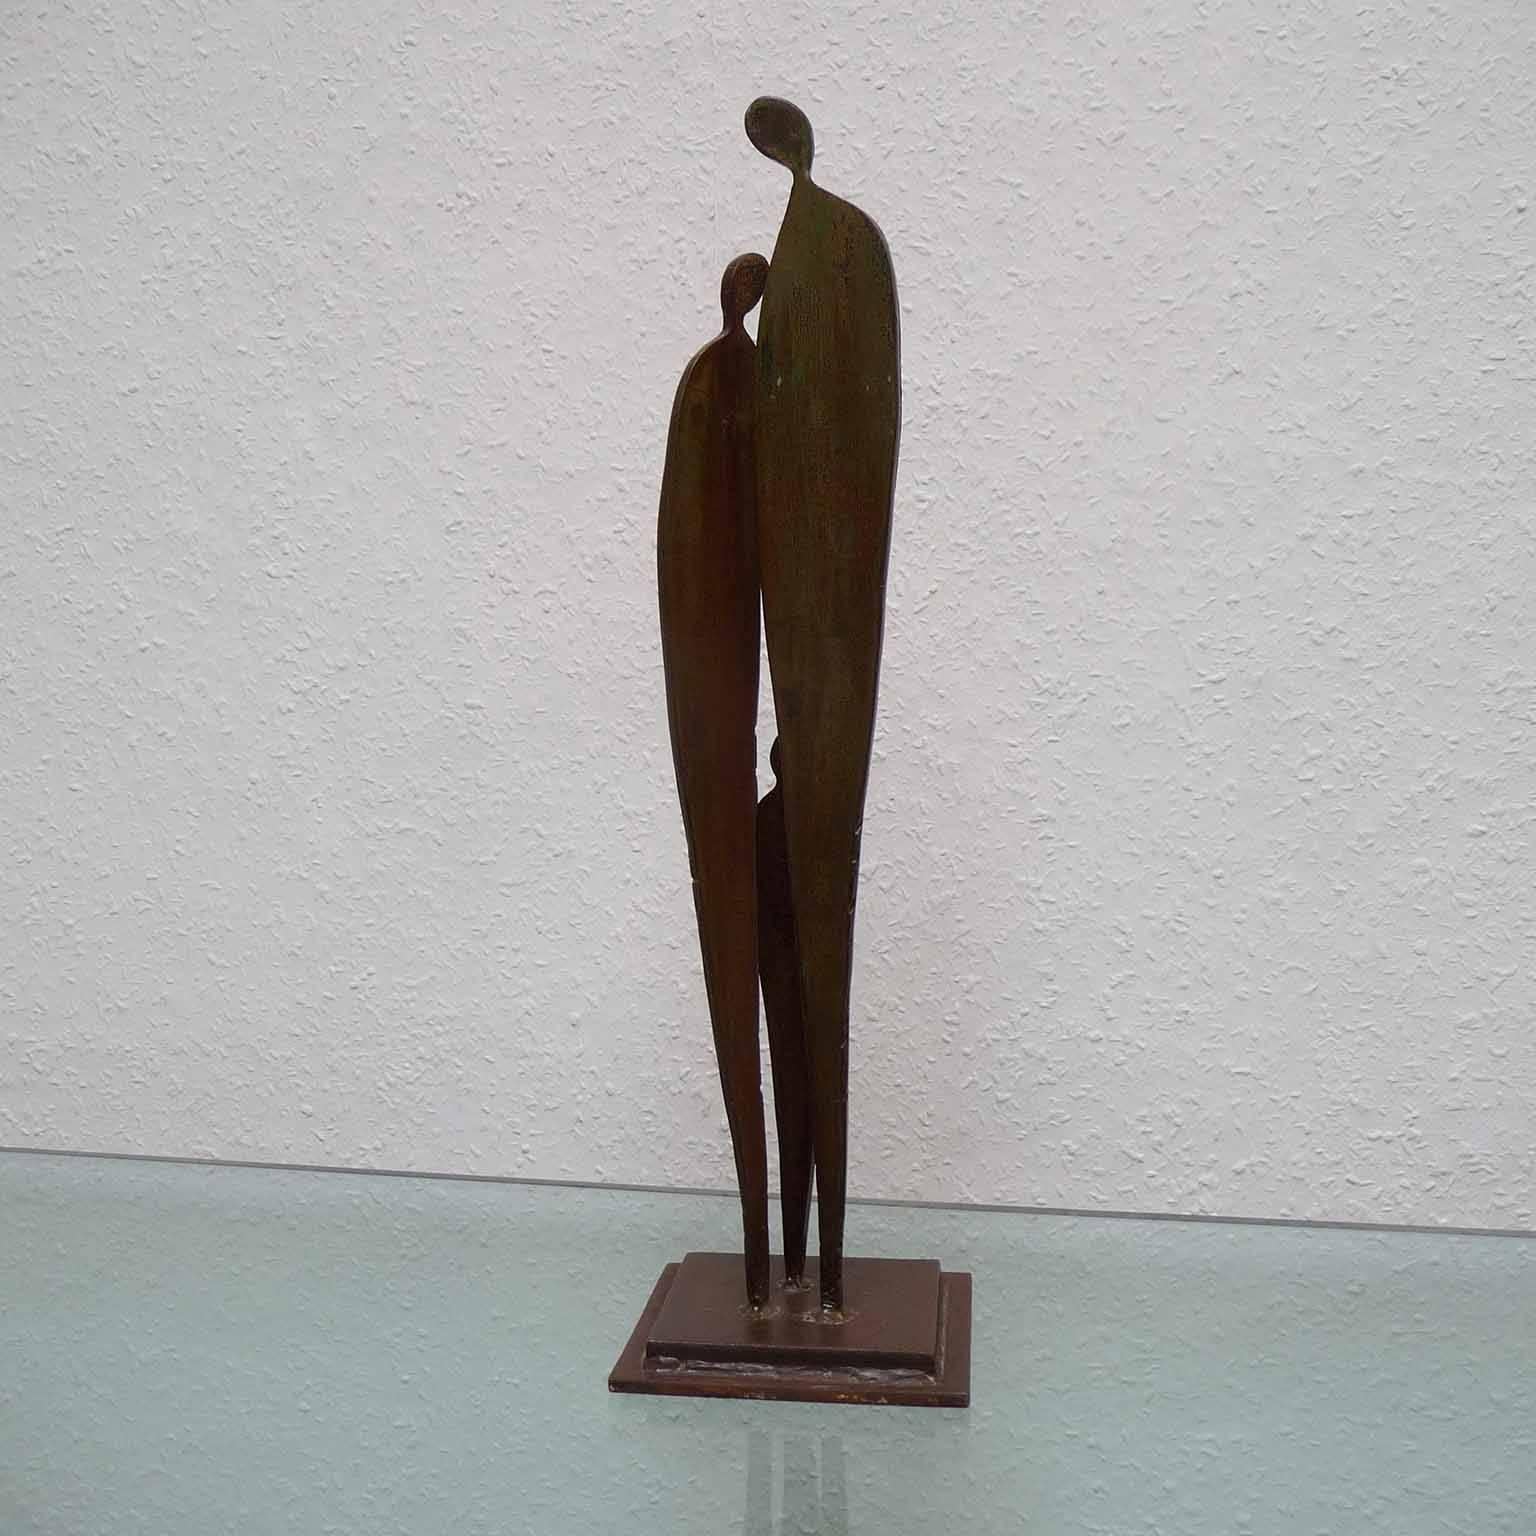 Pierre Donna Patinated Metal Contemporary Sculpture (Patiniert)